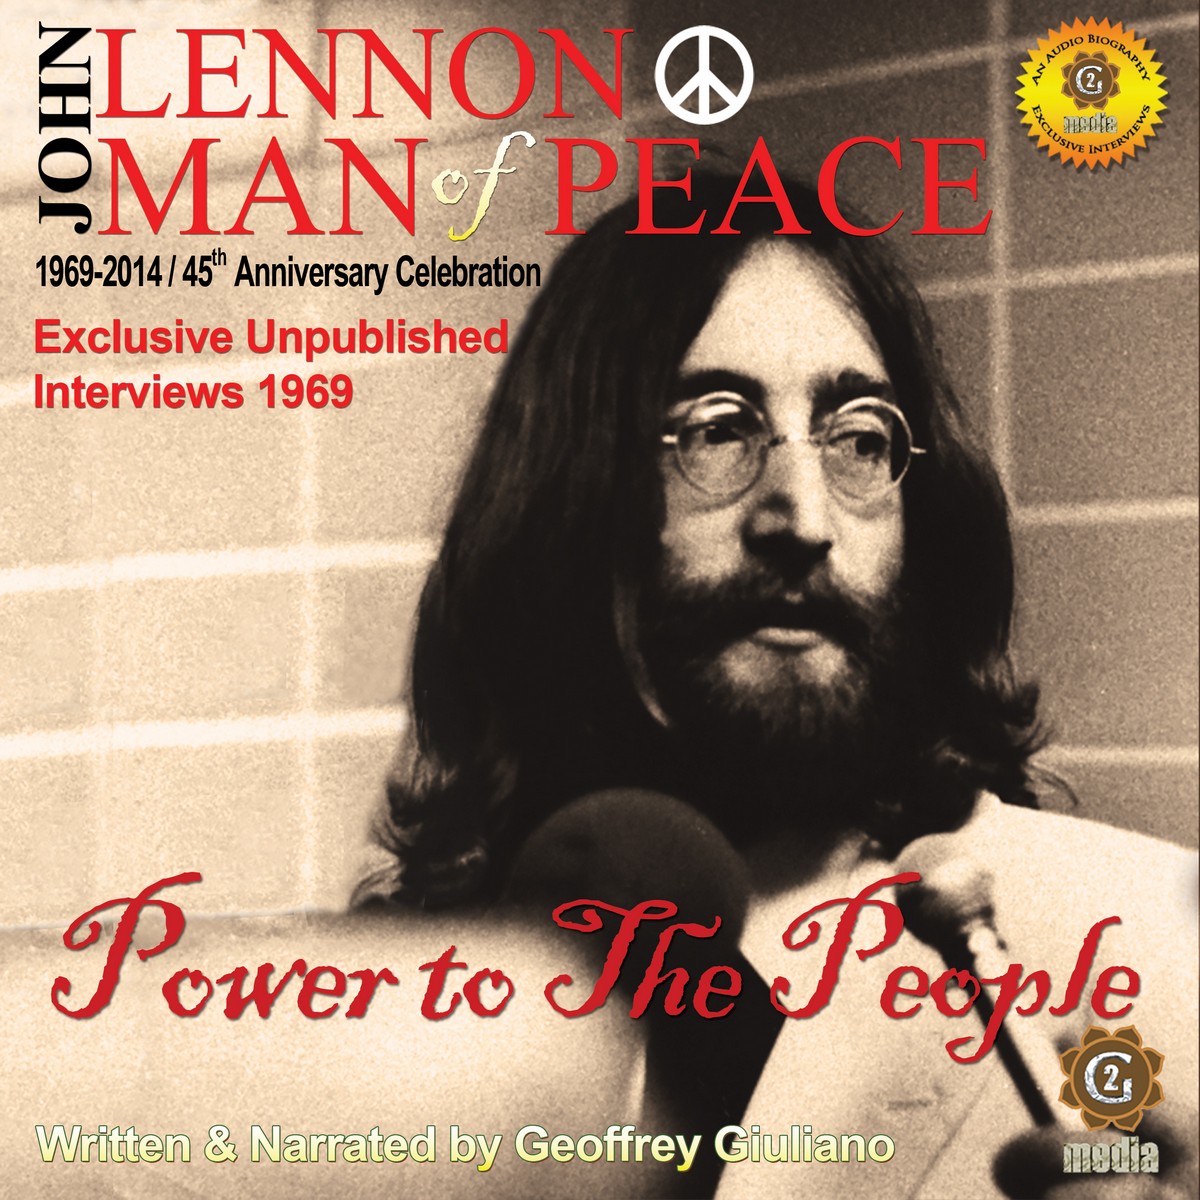 John Lennon Man of Peace, Part 1: Power to the People